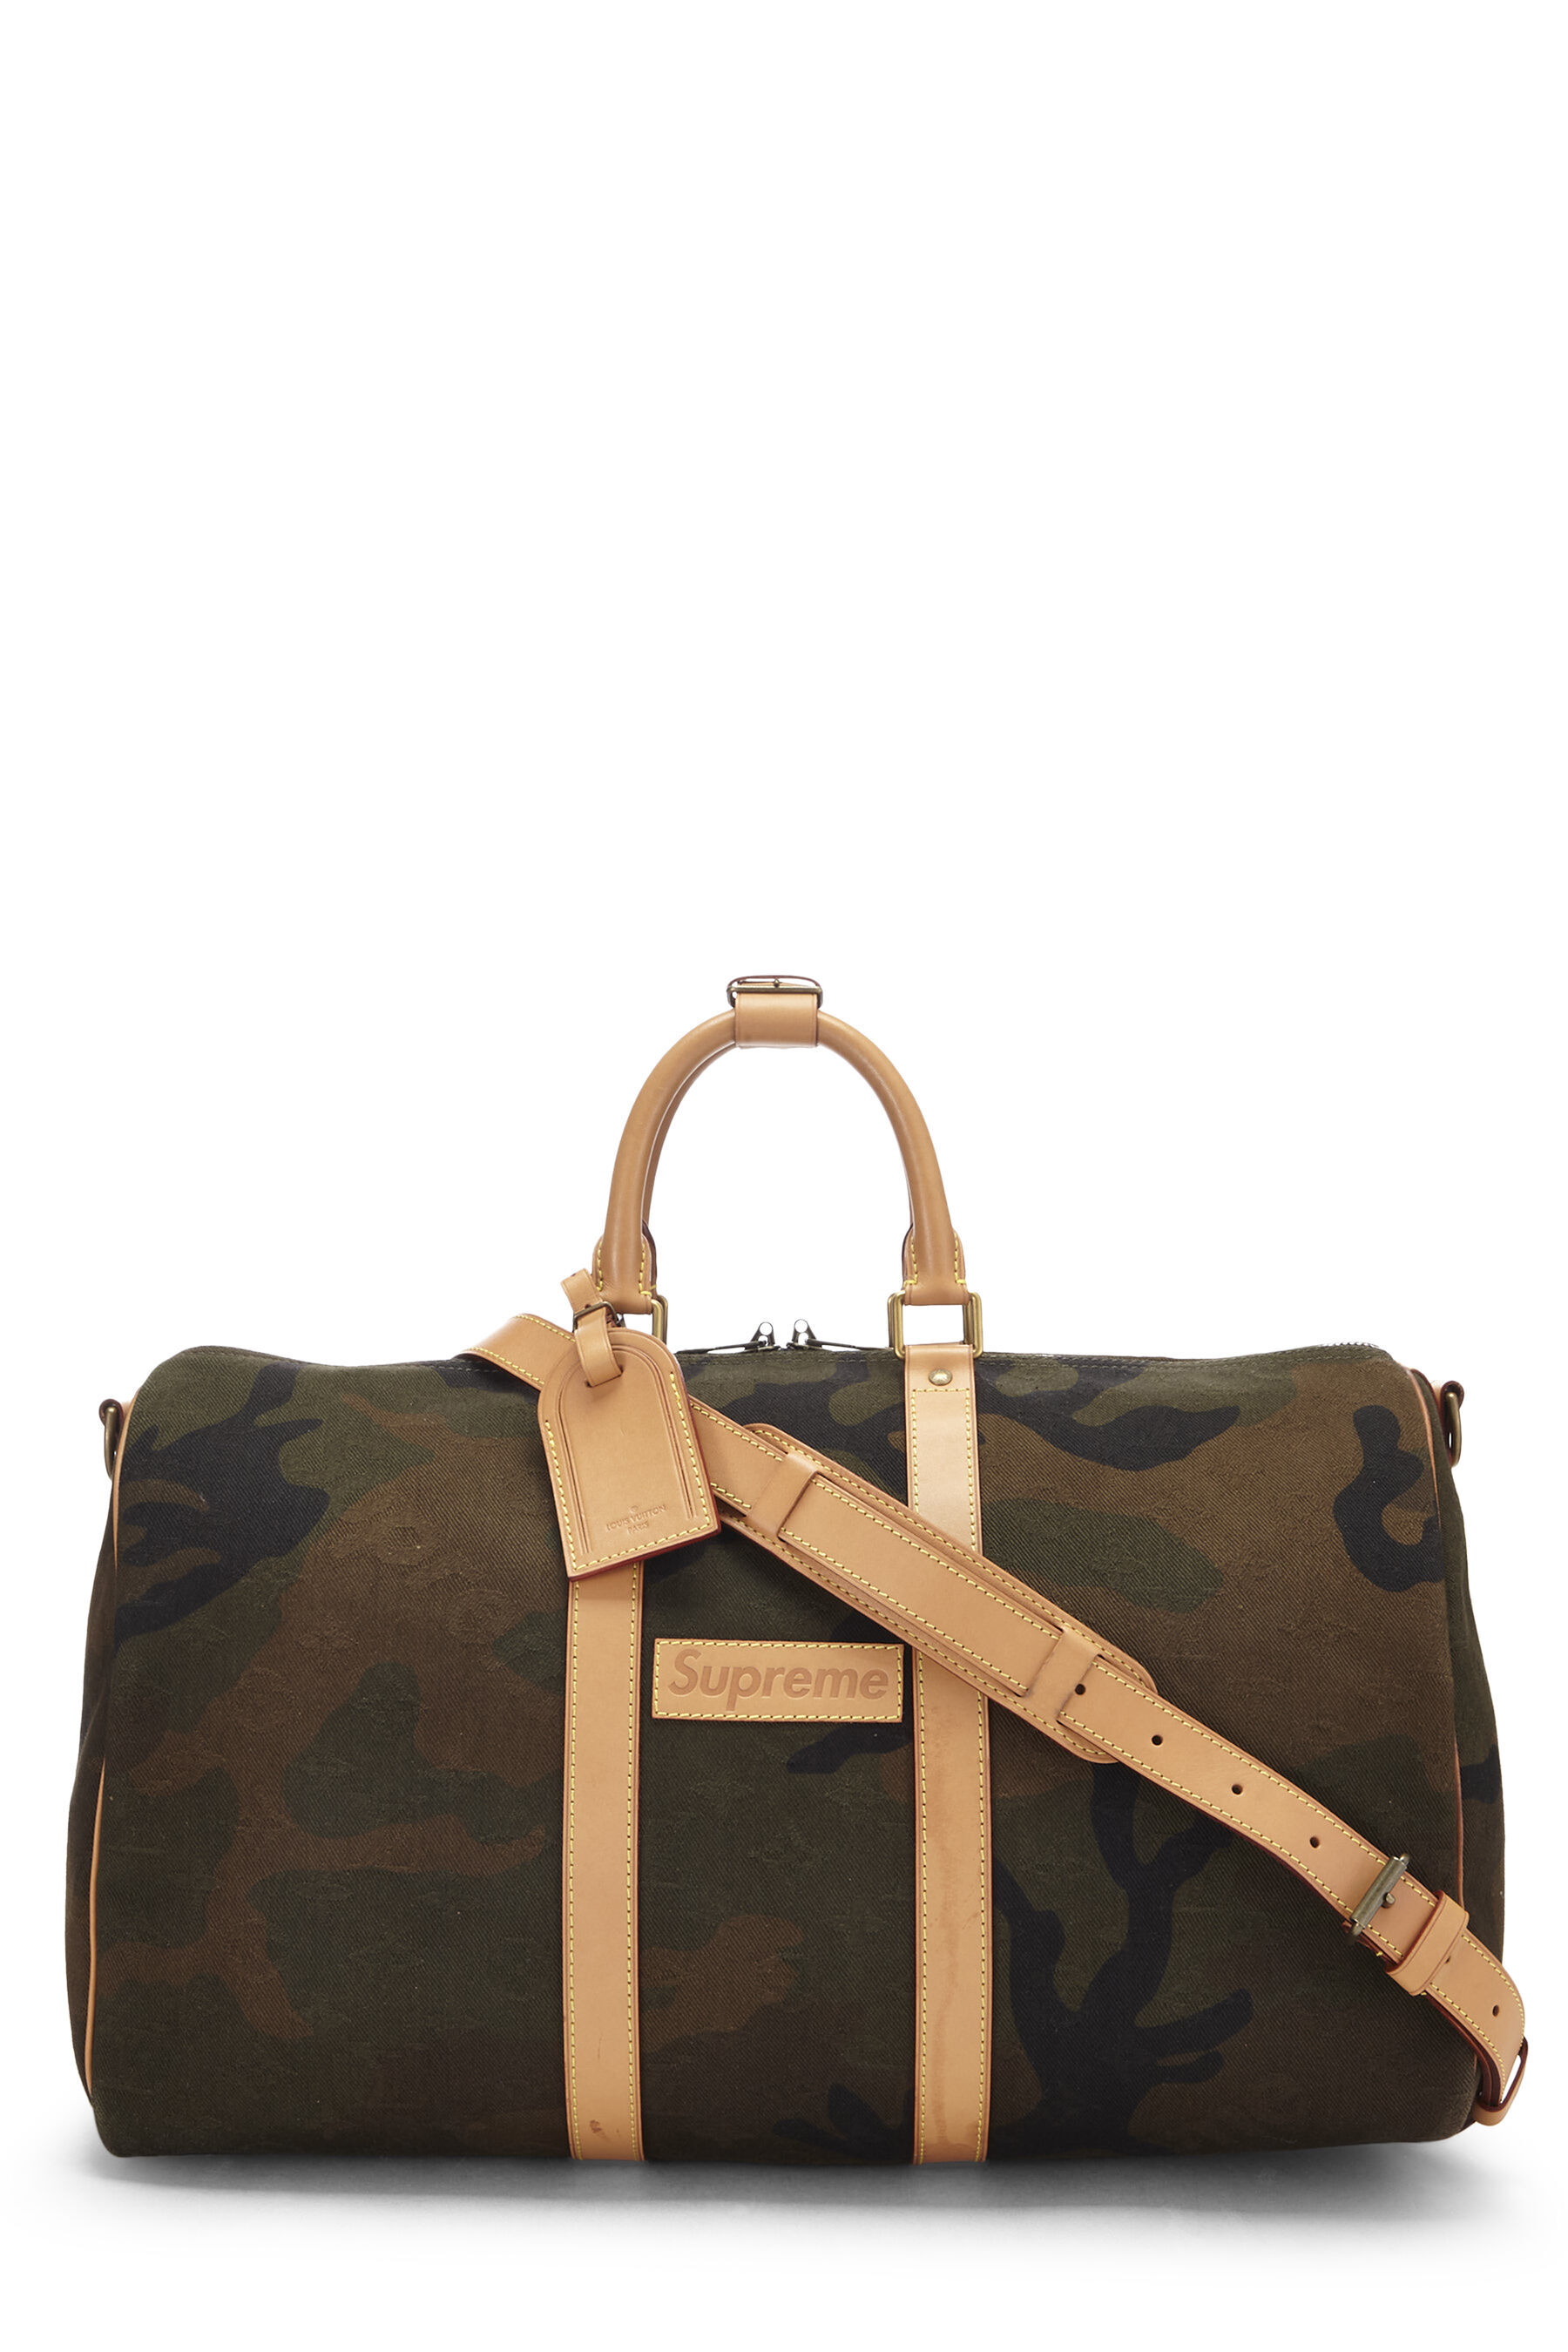 Louis Vuitton X Supreme Keepall Bandouliere 45 Travel Bag  Limited Edition   eBay